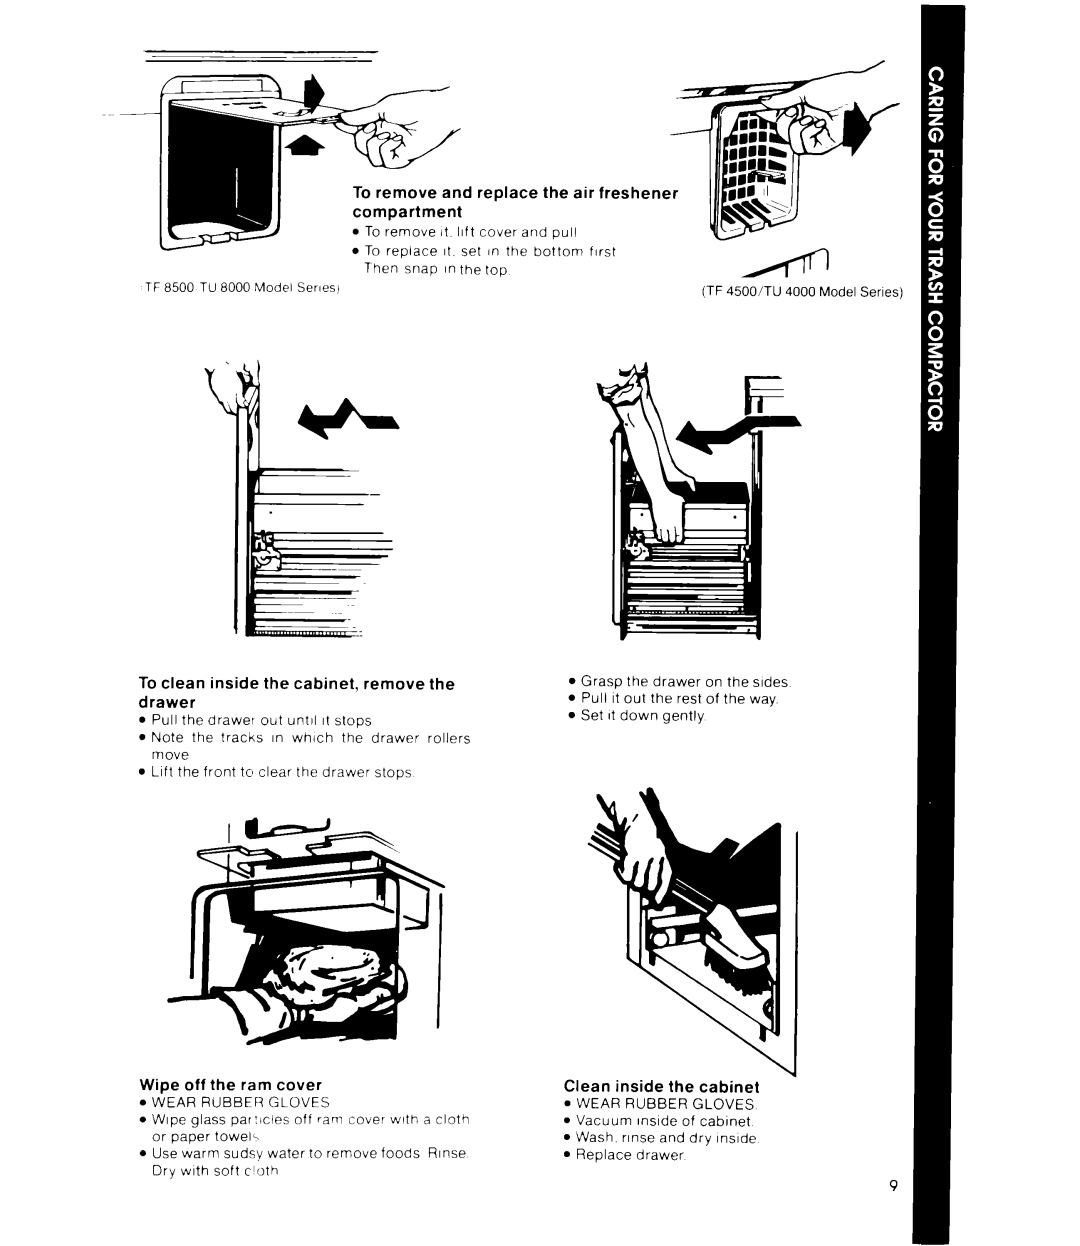 Whirlpool TF 8500 Series manual To remove, replace, To clean inside the cabinet, remove the drawer, Wipe off the ram cover 